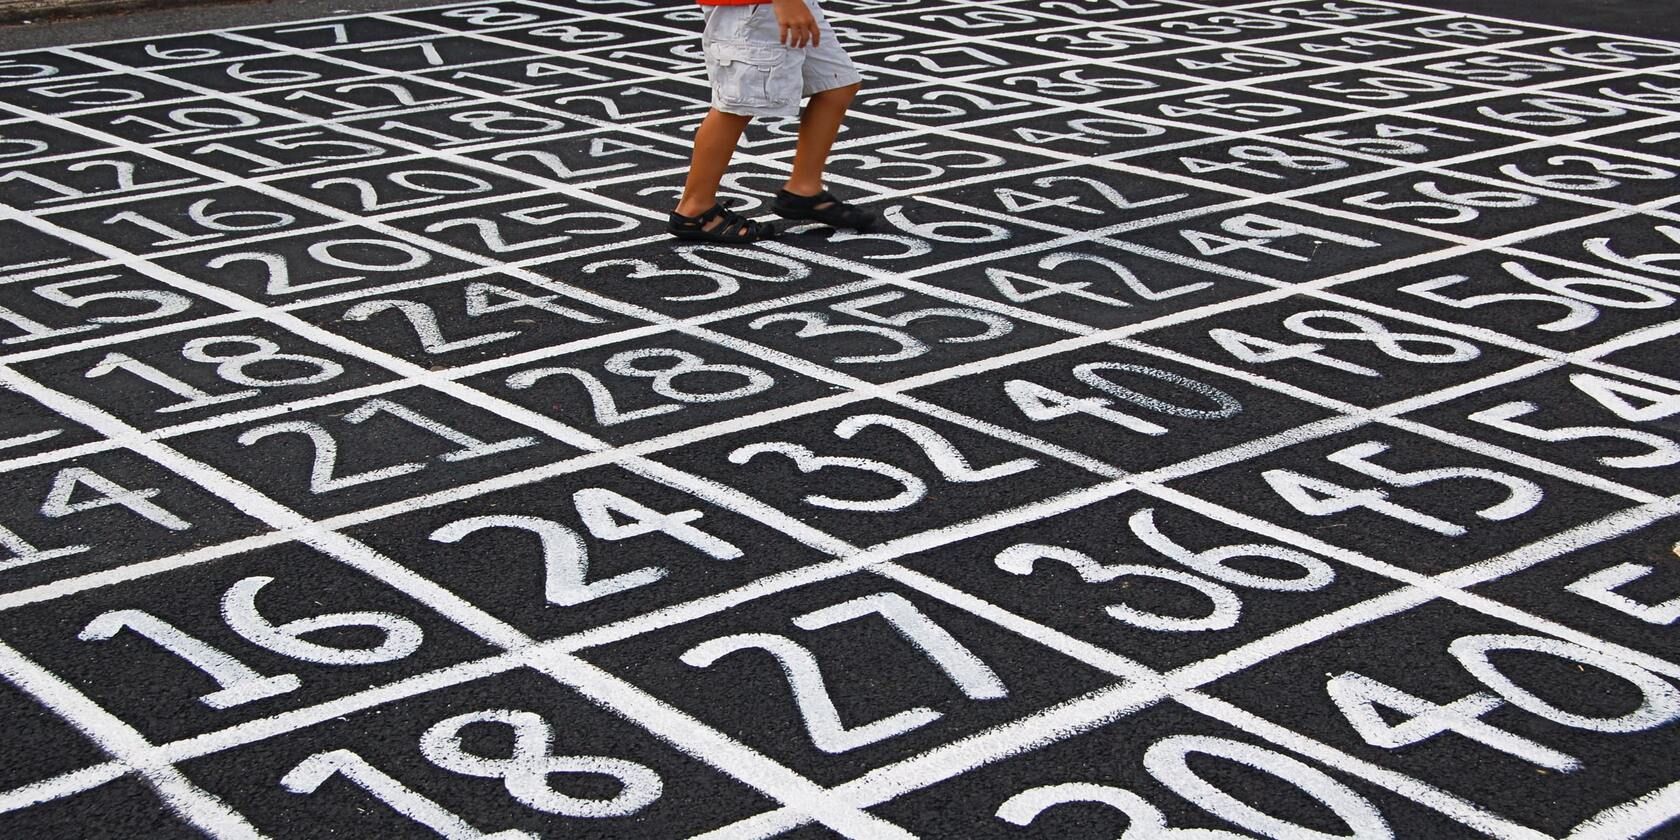 chalked number grid on ground